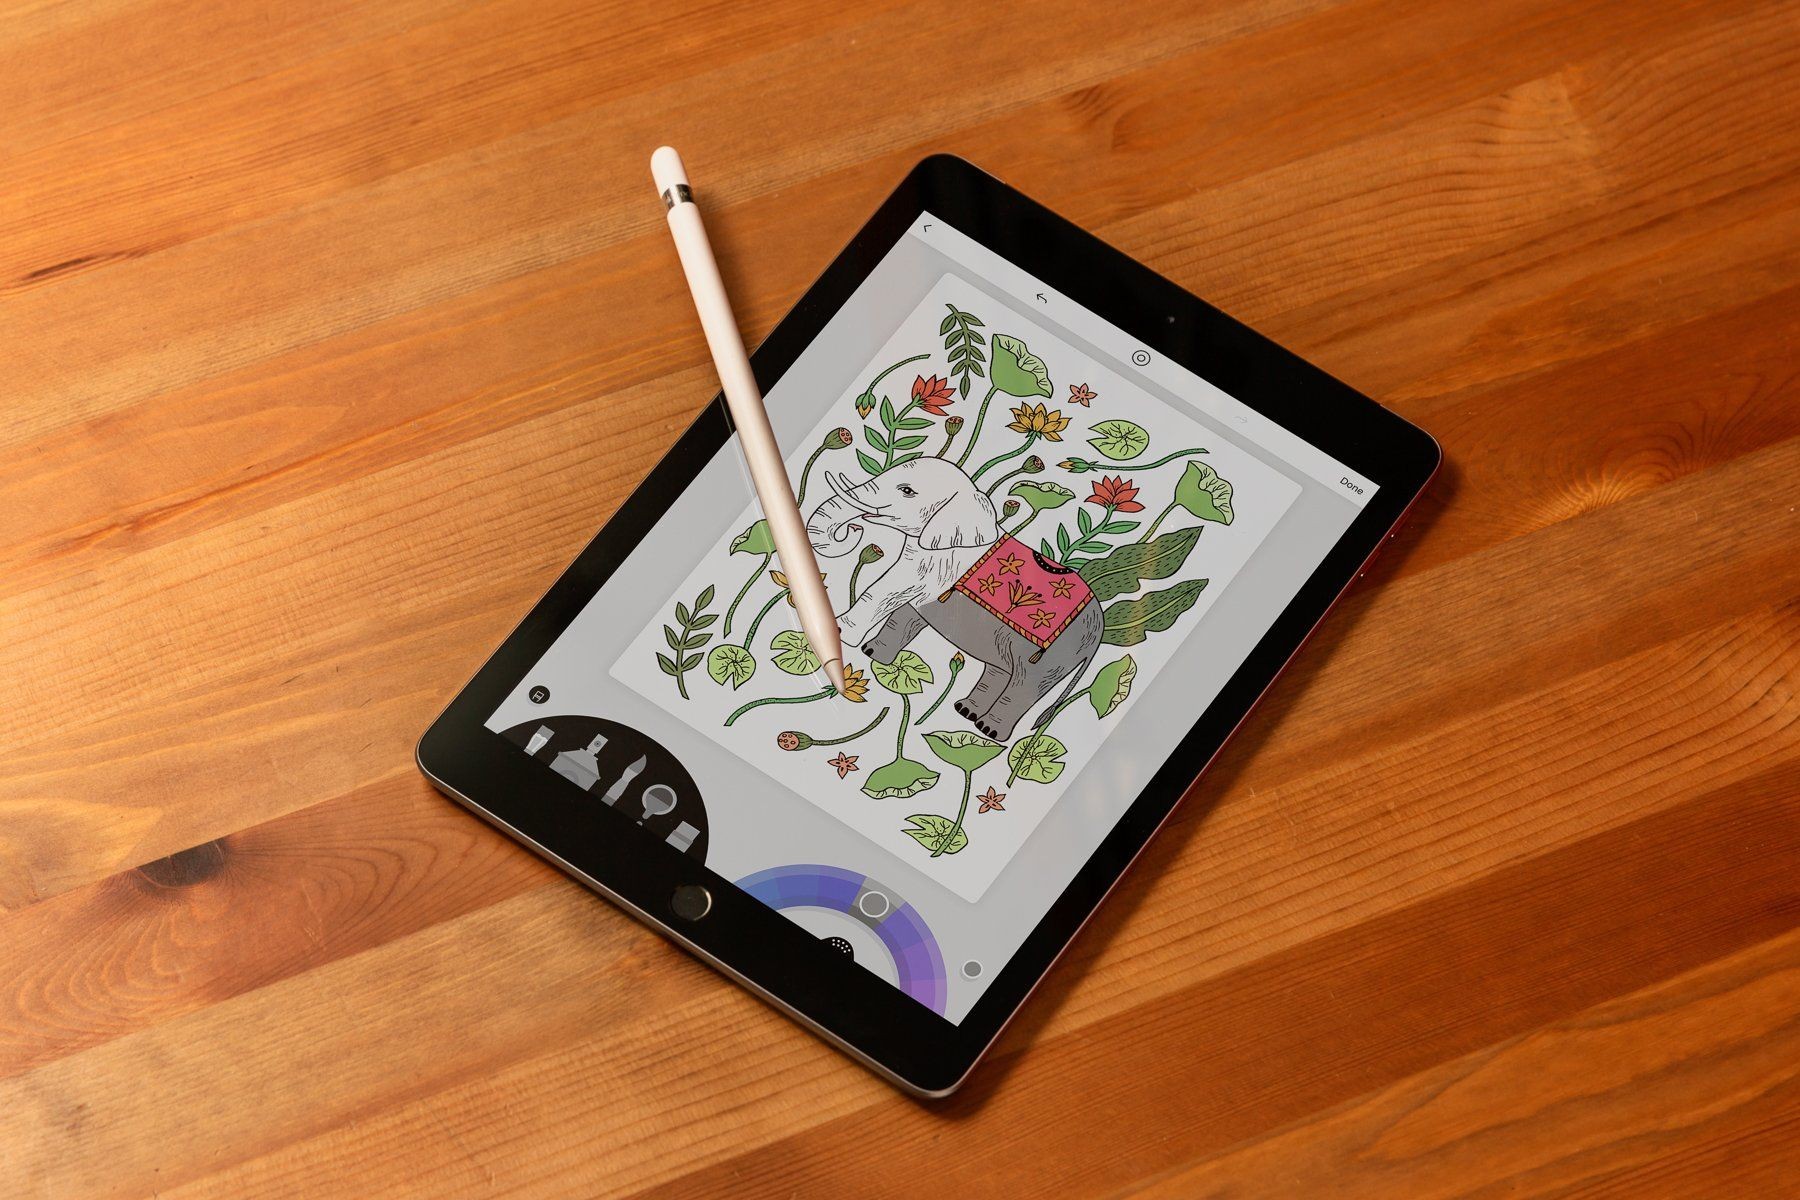 Ipad Papercraft 8 Reasons You Should Apple S Most Basic Ipad Instead Of An Ipad Pro